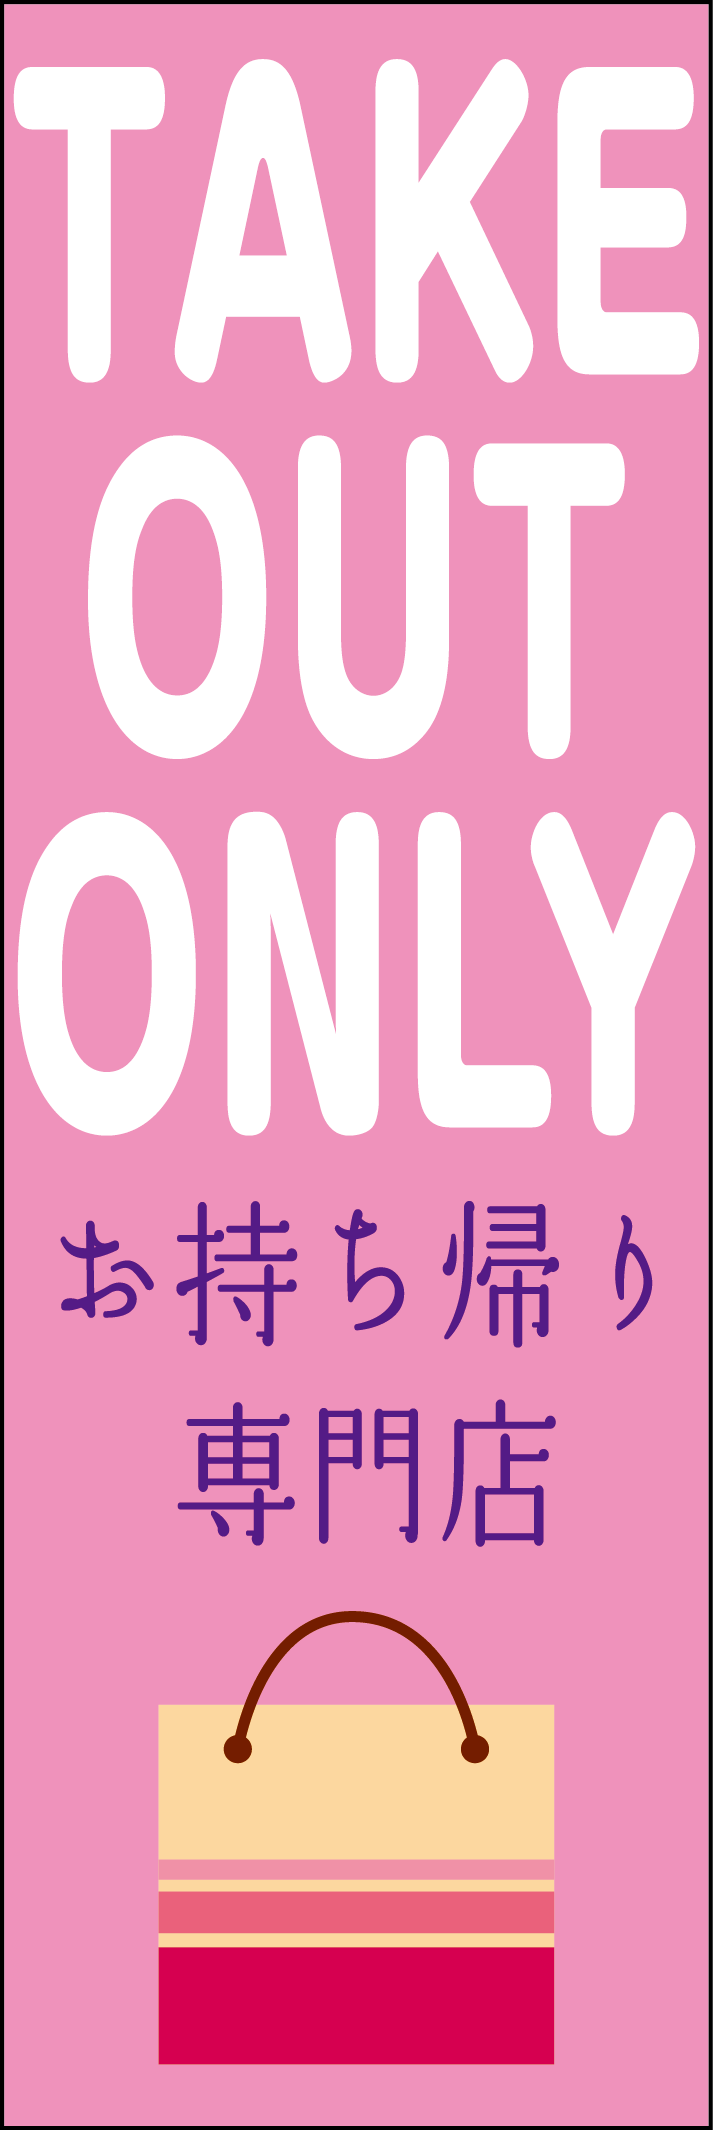 TAKE OUT ONLYお持ち帰り専門店のぼり画像